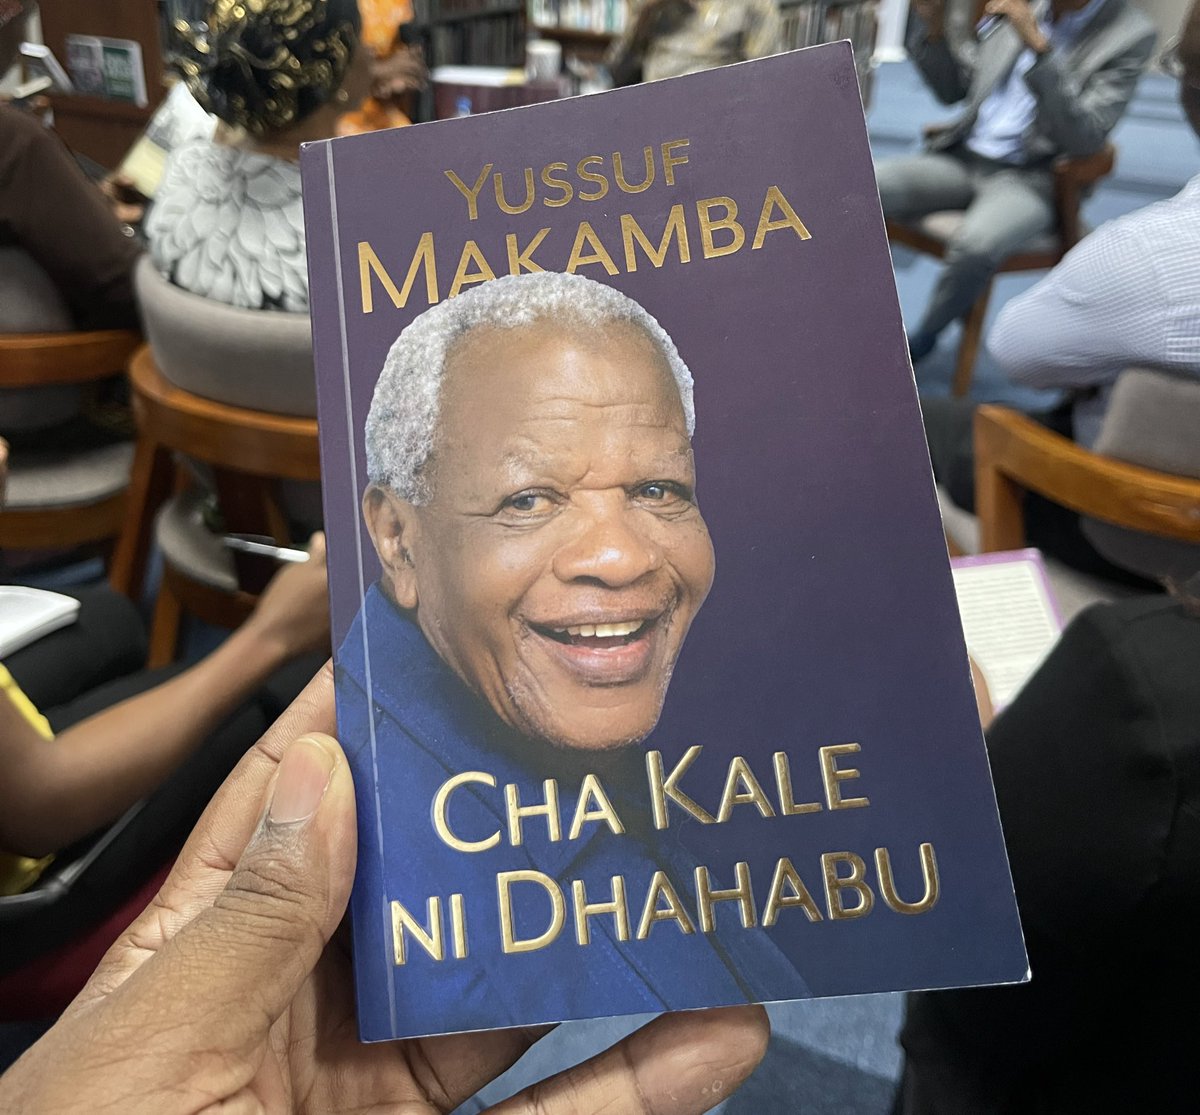 Yes Mzee Yussuf #Makamba is an excellent orator, but we are not ready for this page turner. Had an accidental privilege to practice for my next career as “Beta Reader” from few chapters; I dare declare #ChaKaleNiDhahabu will be a bestseller.